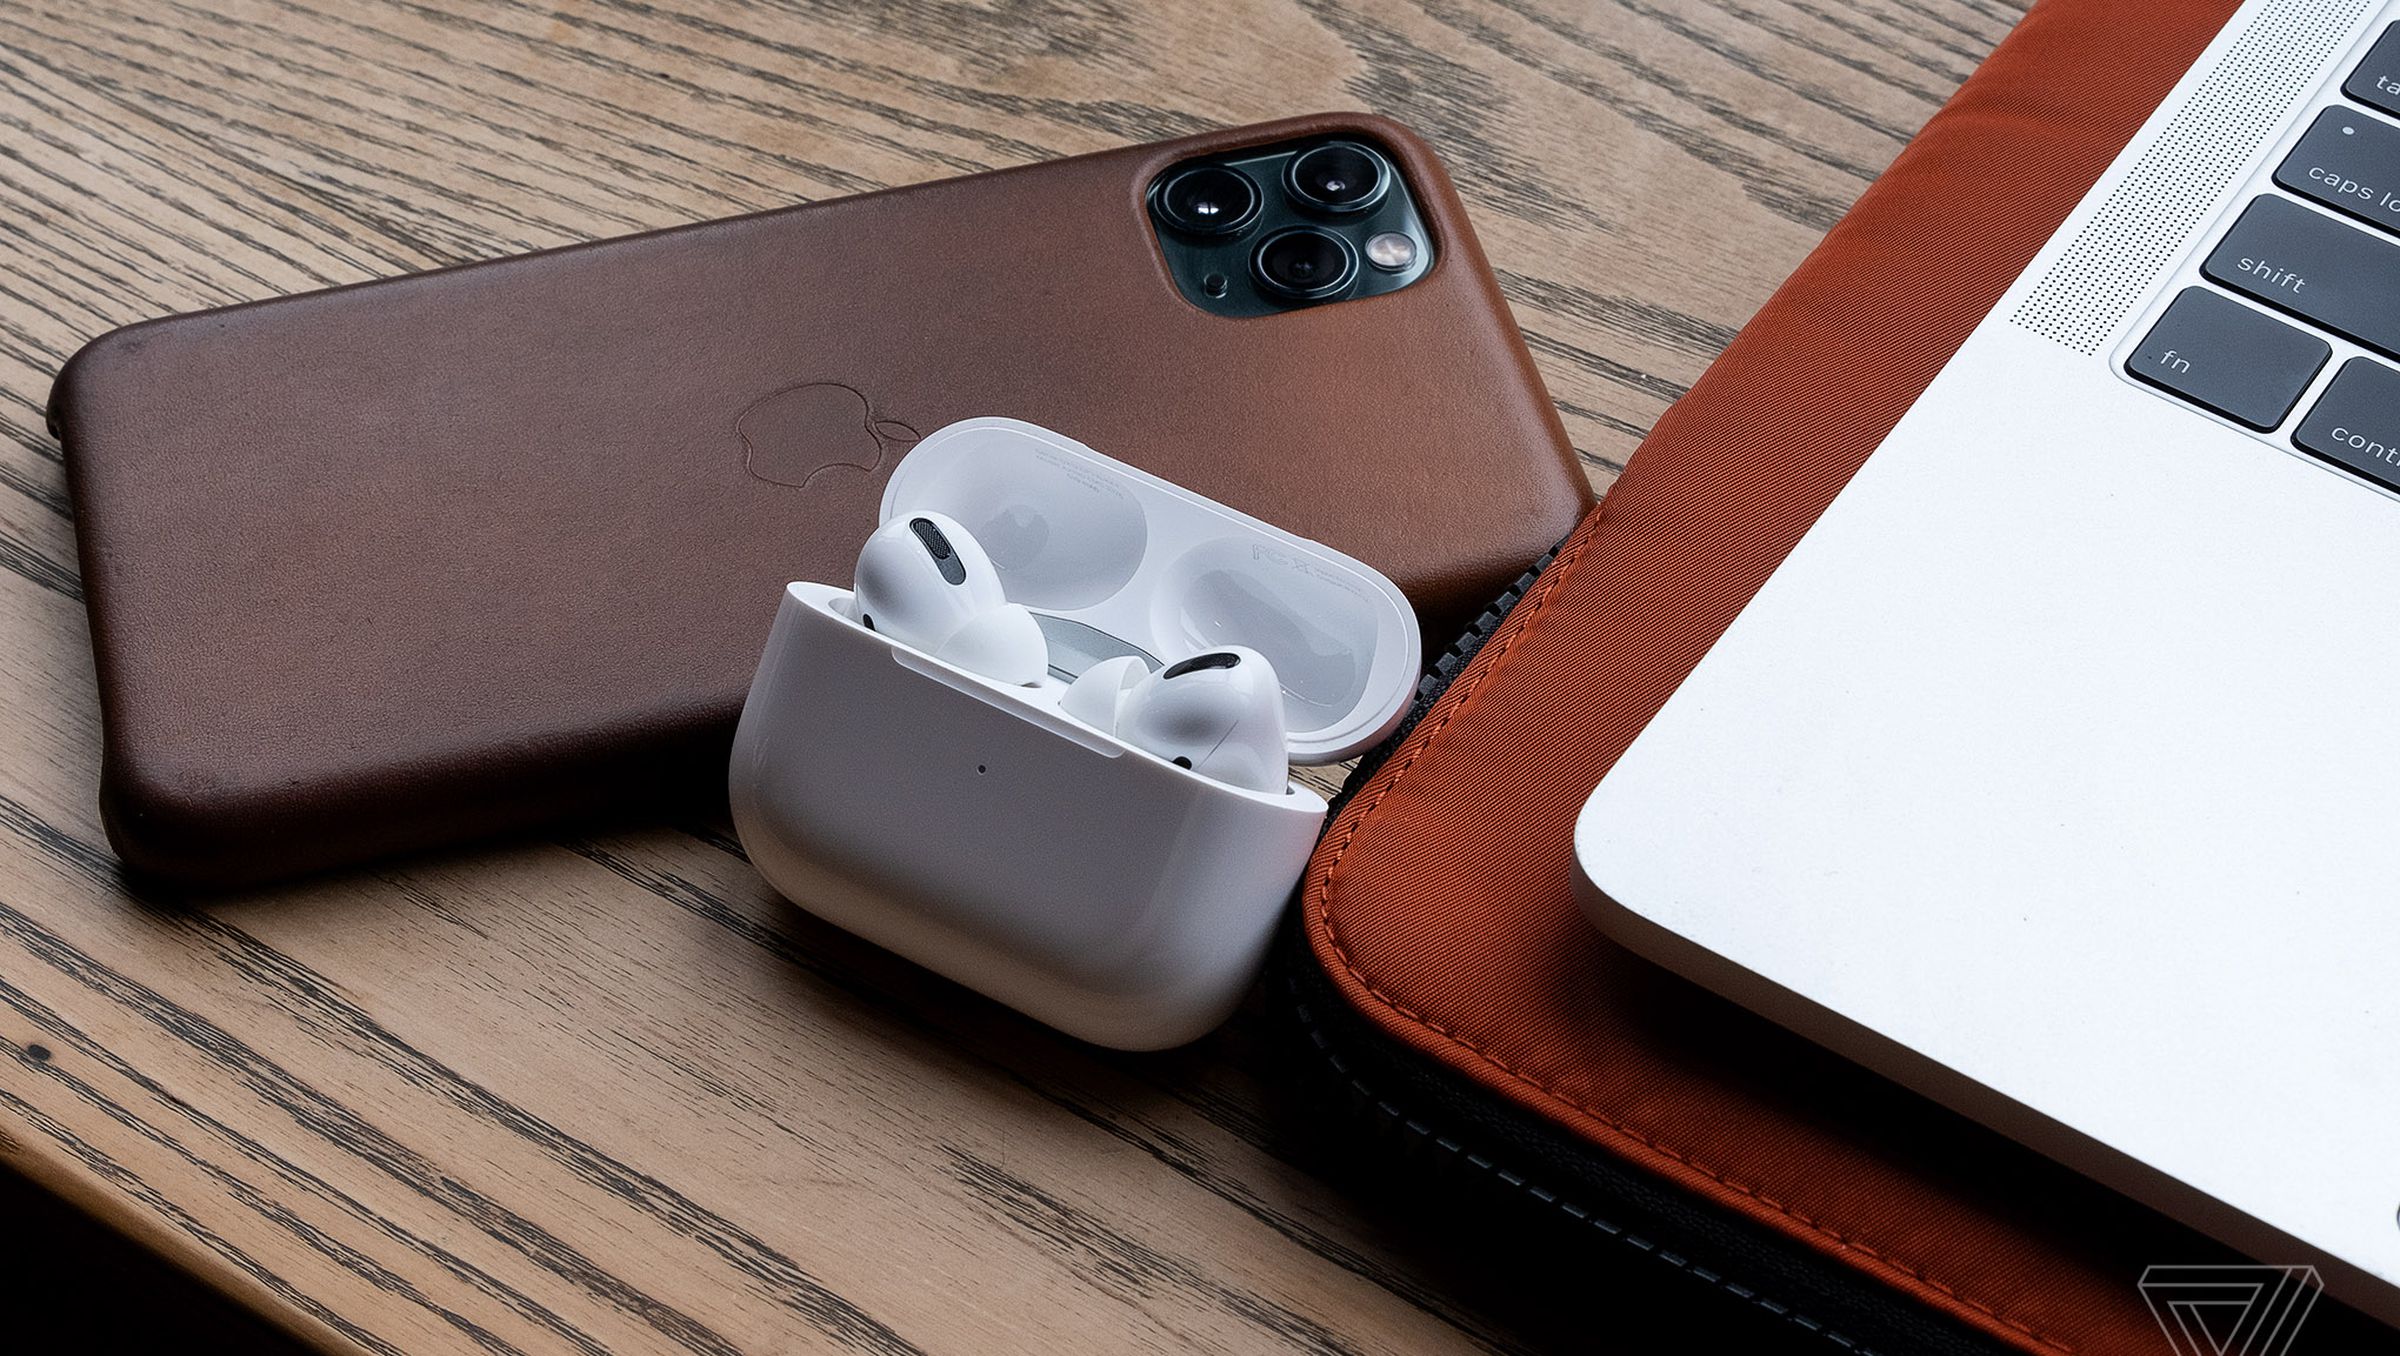 The AirPods Pro, the best wireless earbuds for people using Apple products, pictured next to an iPhone 11 Pro Max and MacBook Pro.